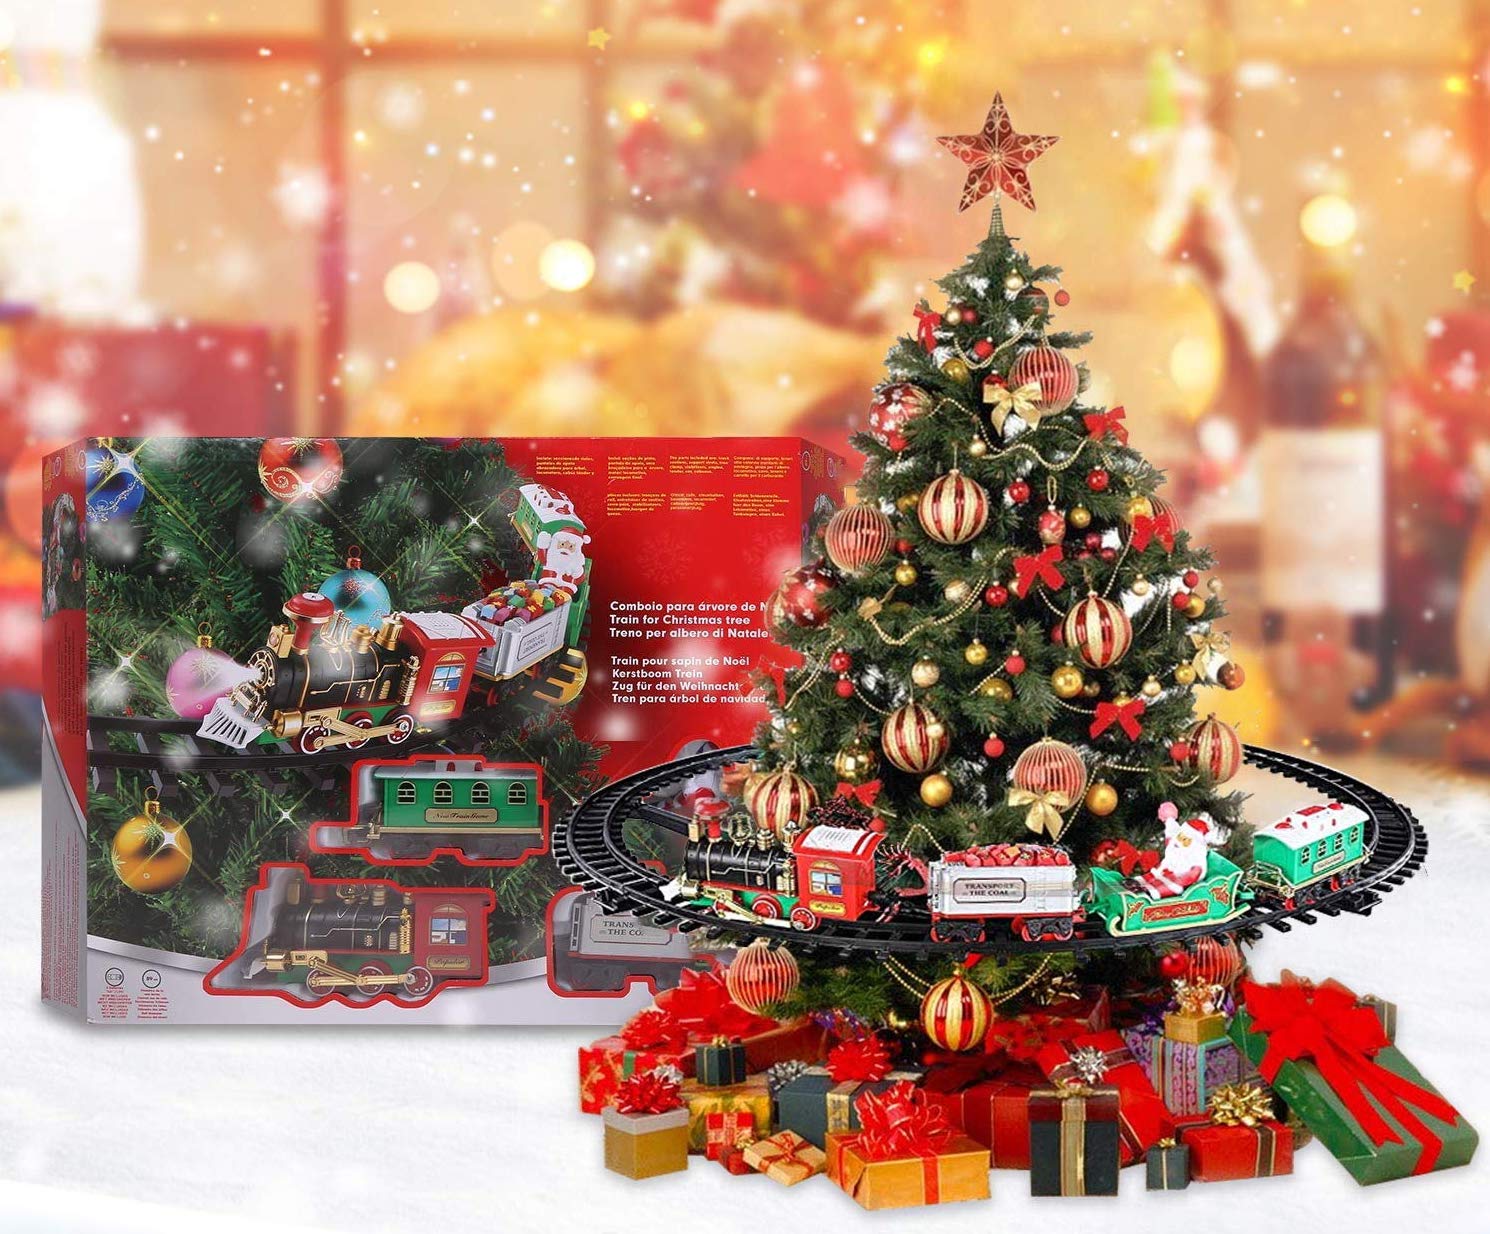 Top 10 Best Christmas Gifts for Kids in 2020 Reviews